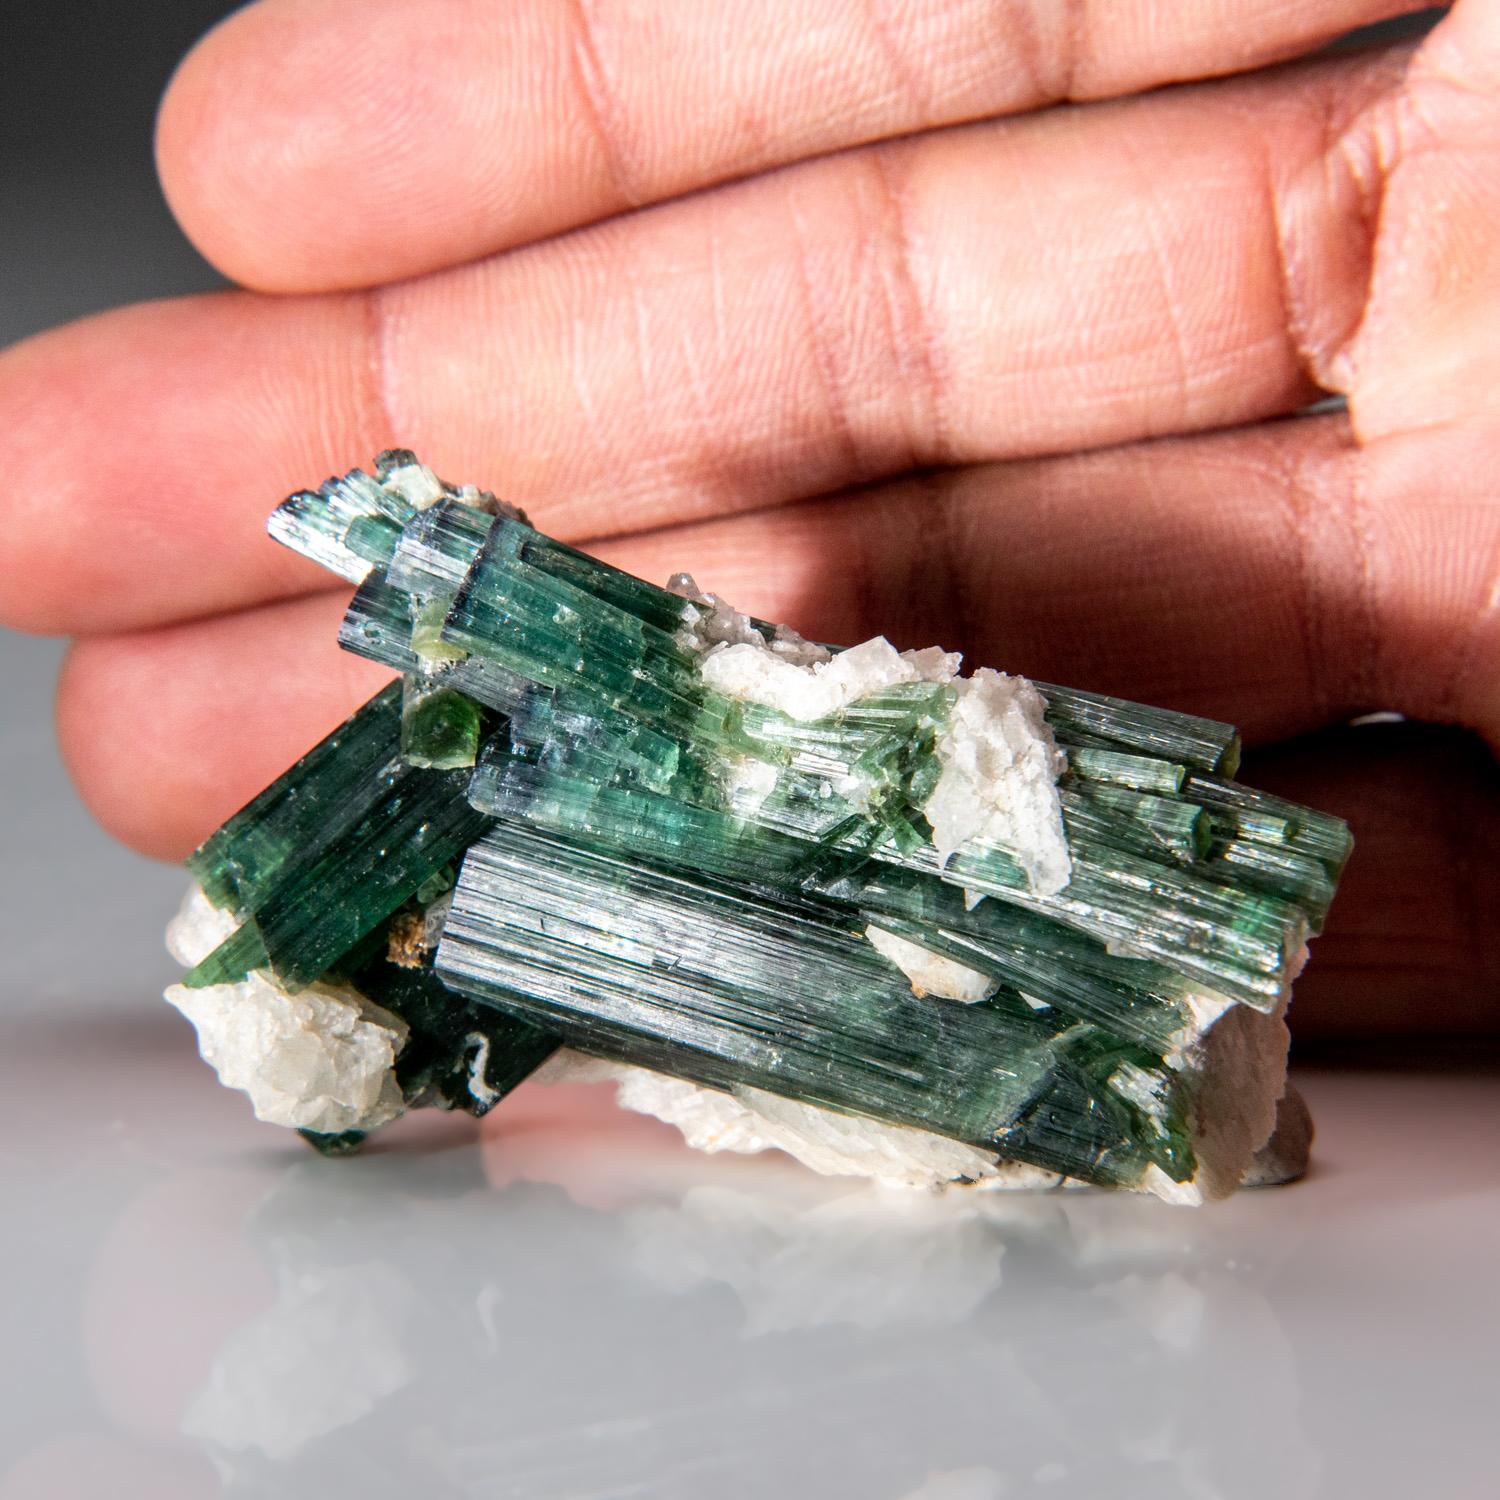 from Paprok, Kamdesh District, Nuristan Province, Afghanistan Several prismatic crystals of green elbaite tourmaline long in platy white albite crystals. The tourmaline crystal is well defined with deeply striated crystal faces. The elbaite